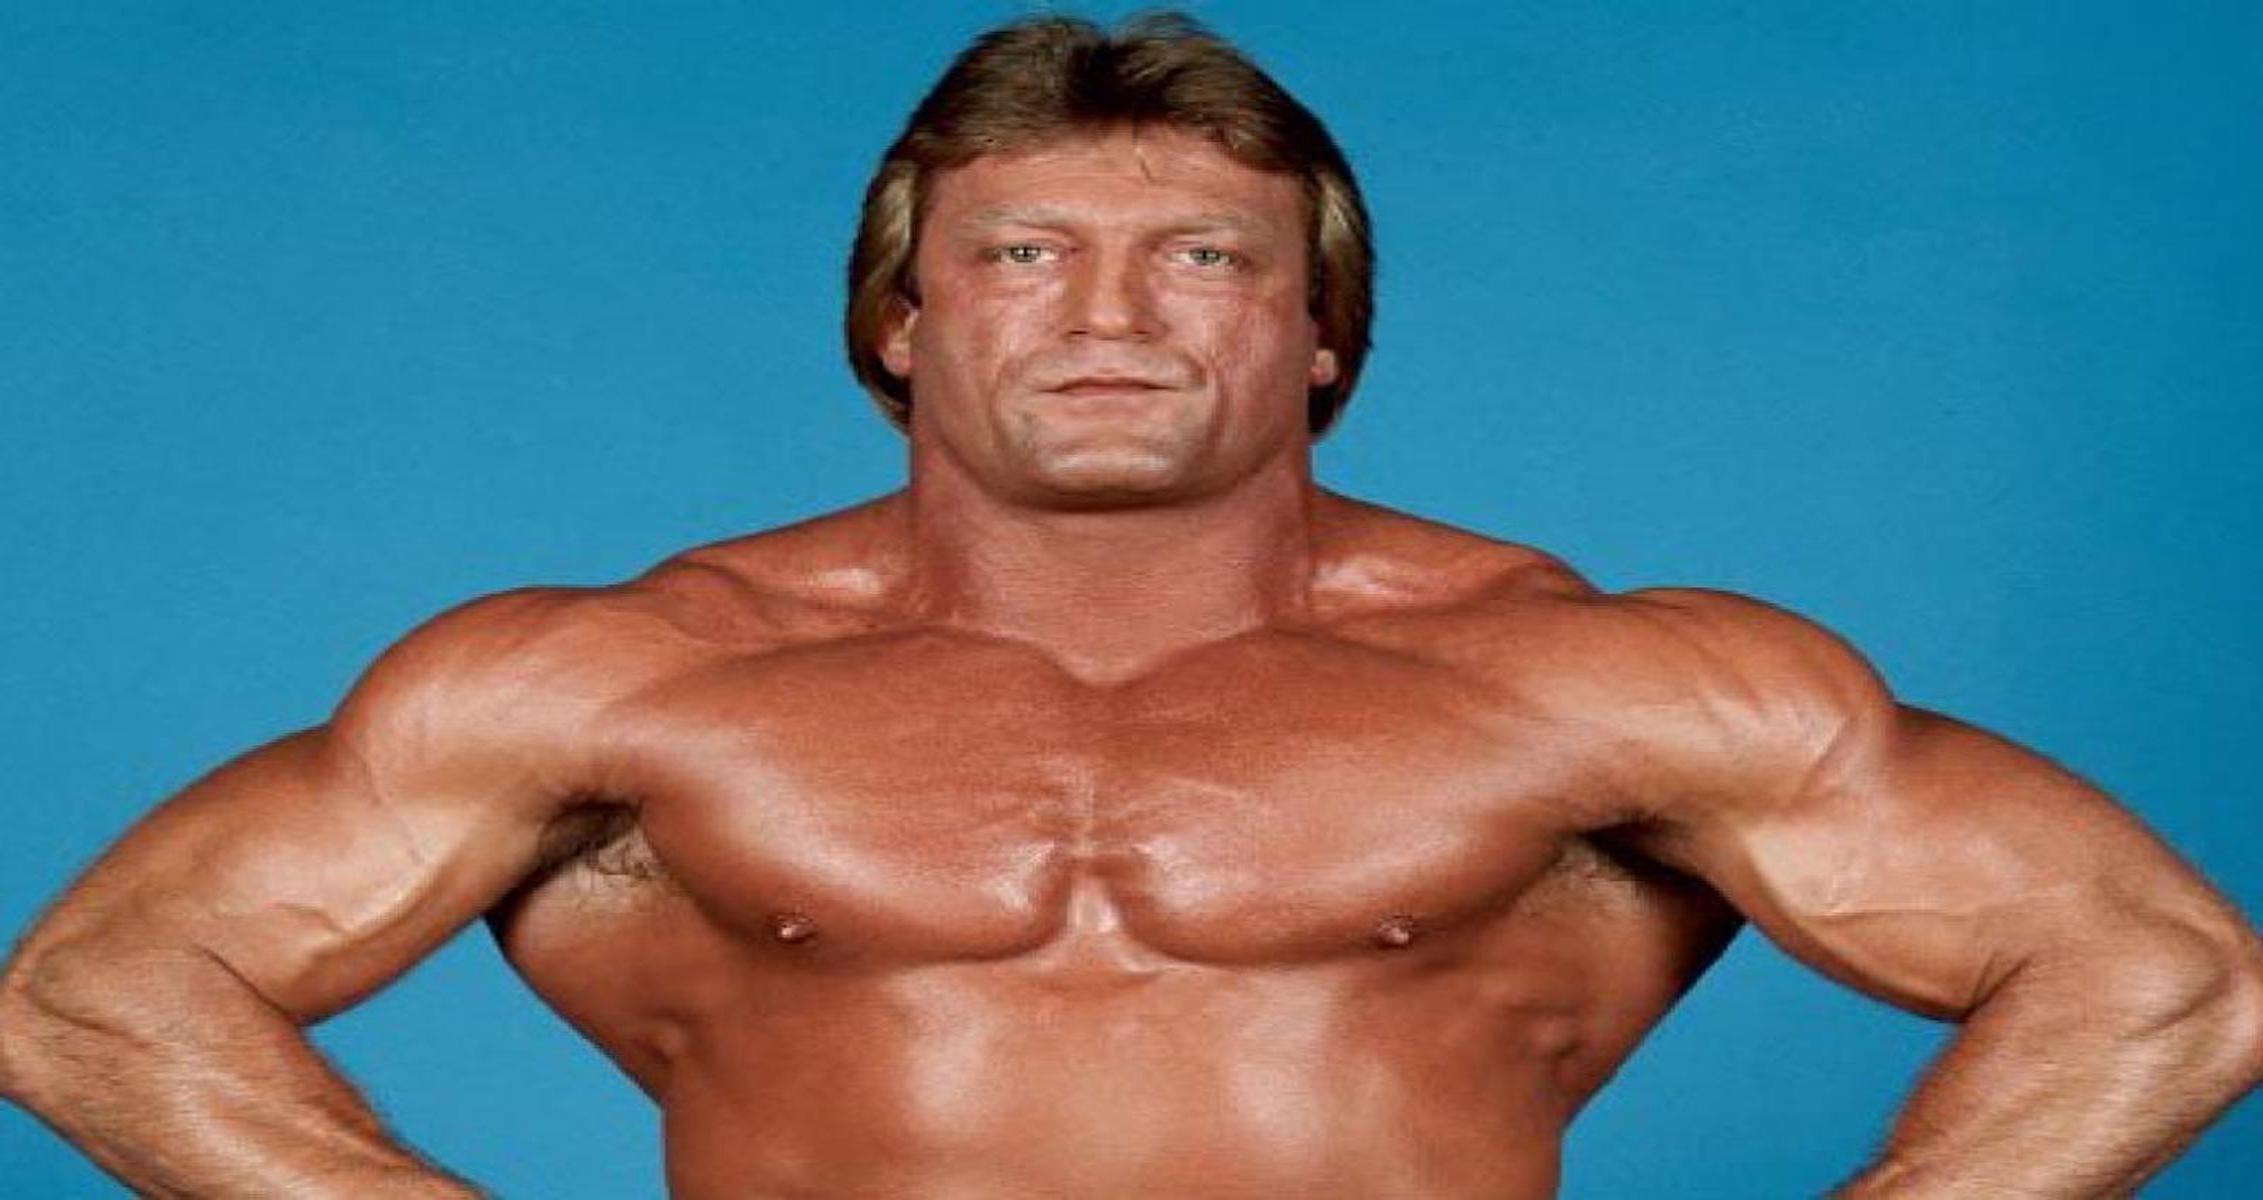 Paul Orndorff, Known As WWE’s ‘Mr. Wonderful’ Passes Away At 71